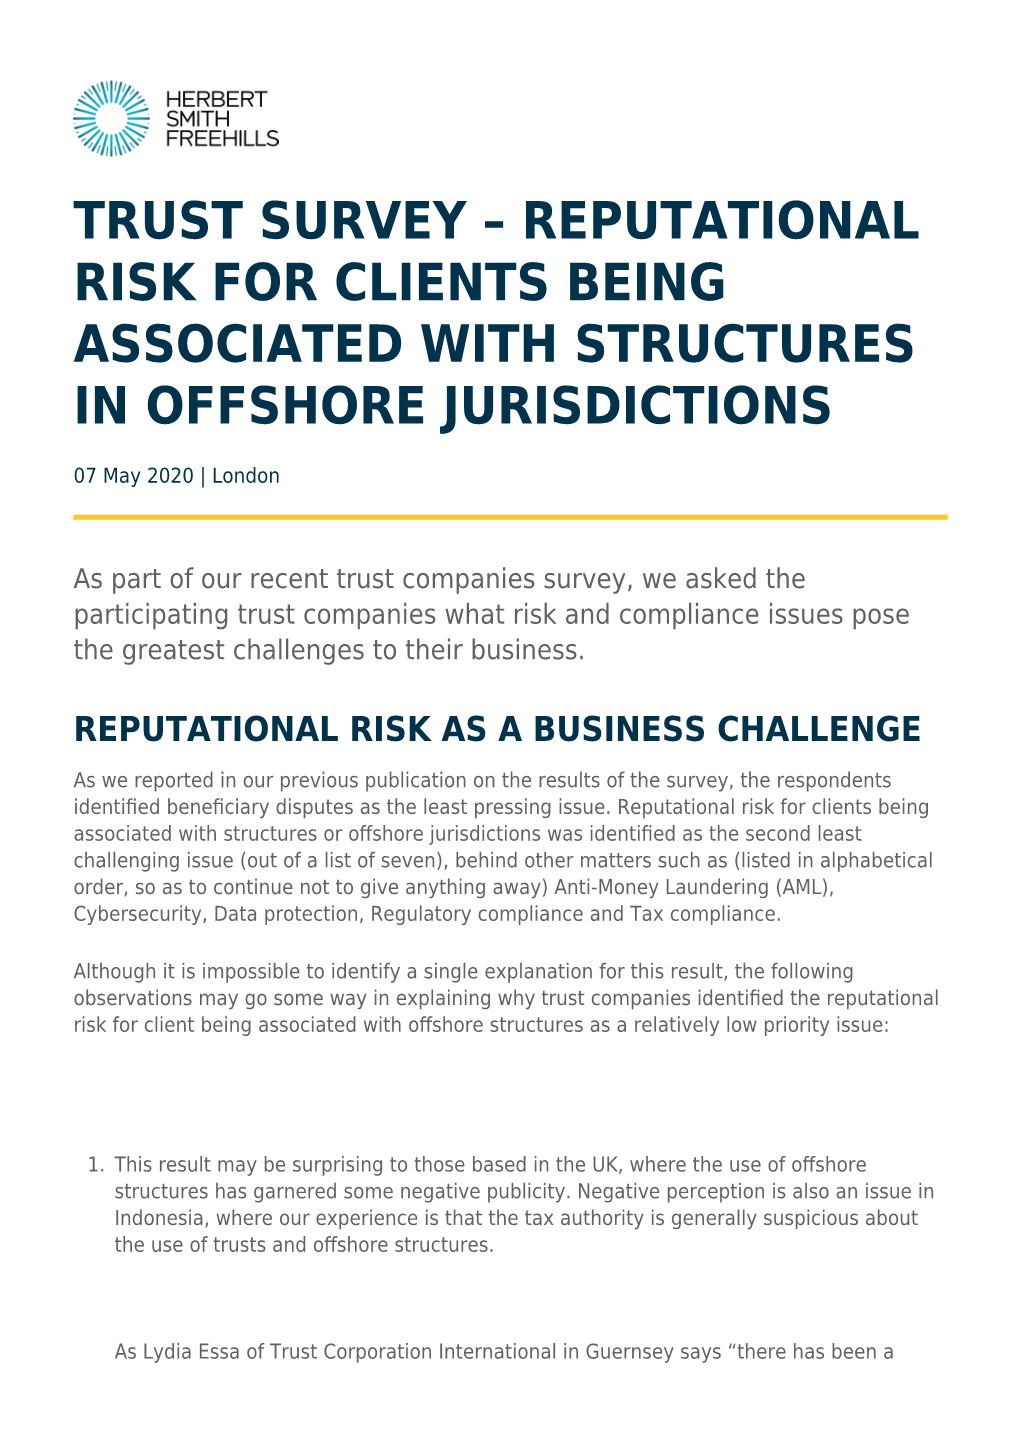 Reputational Risk for Clients Being Associated with Structures in Offshore Jurisdictions